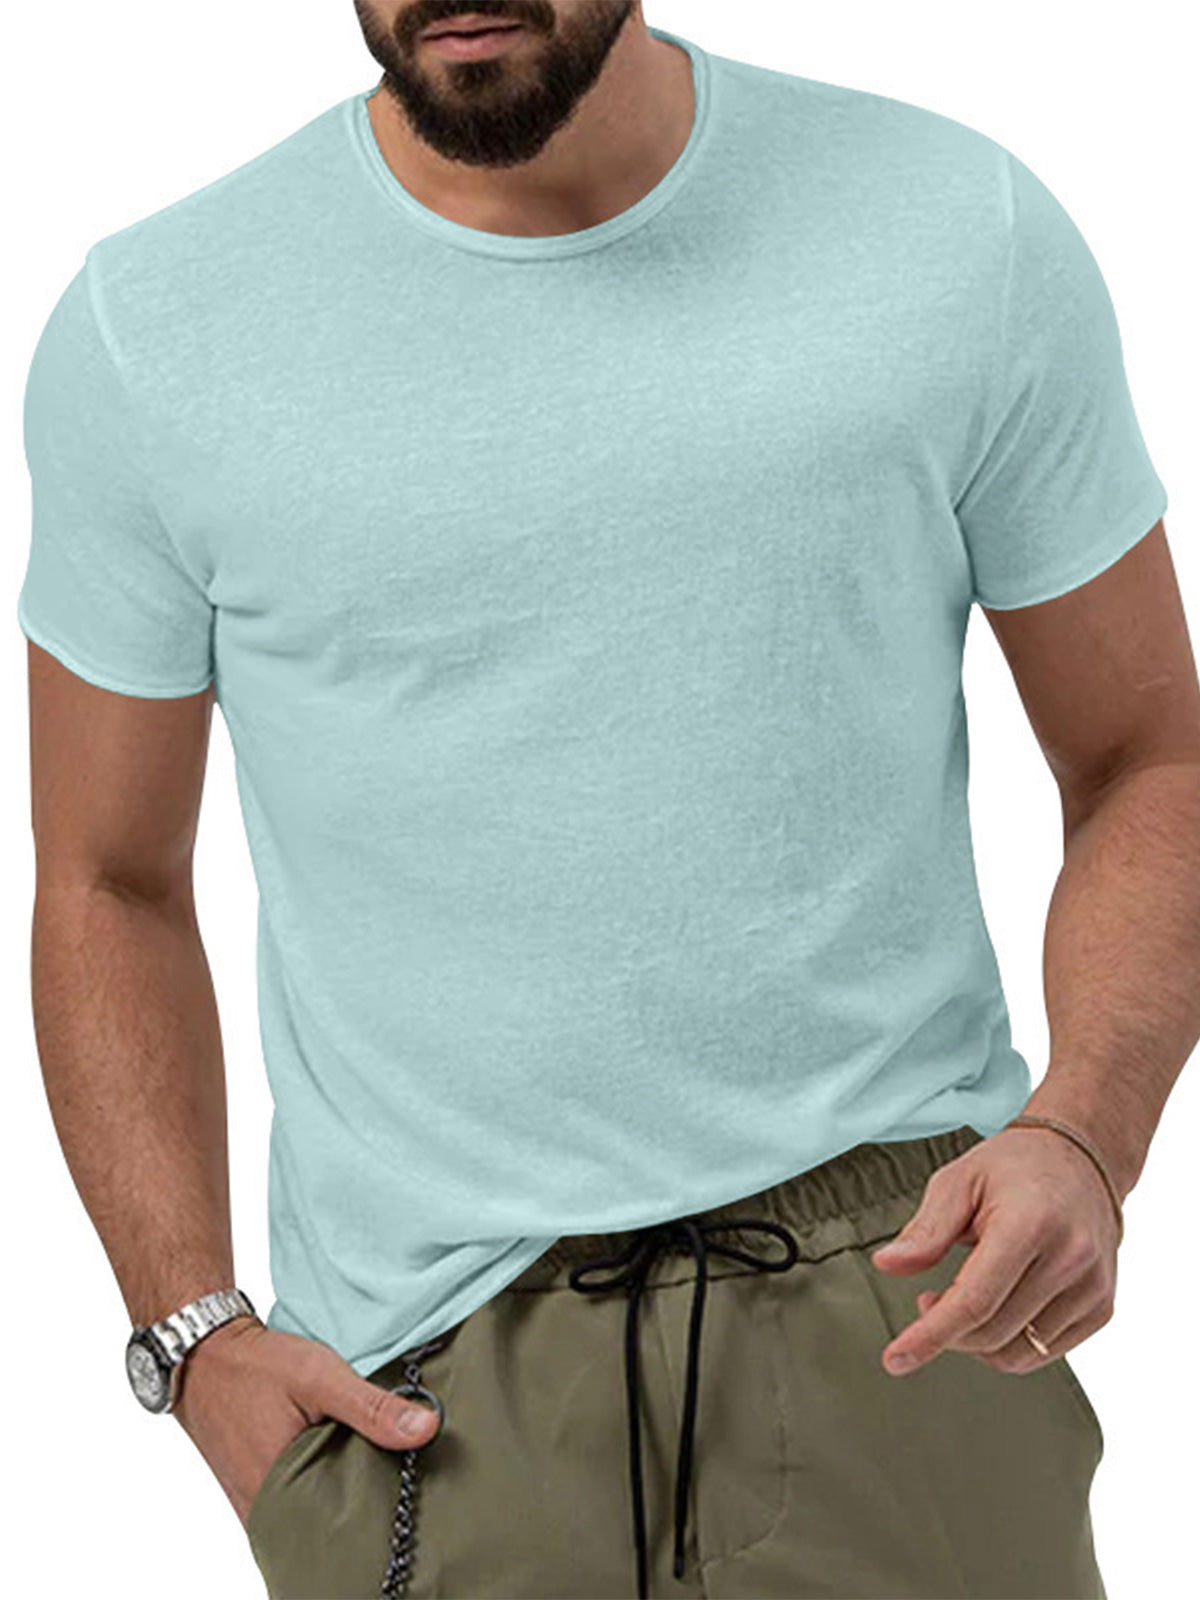 Men's Solid Color Breathable Round Neck Short Sleeve T-Shirt